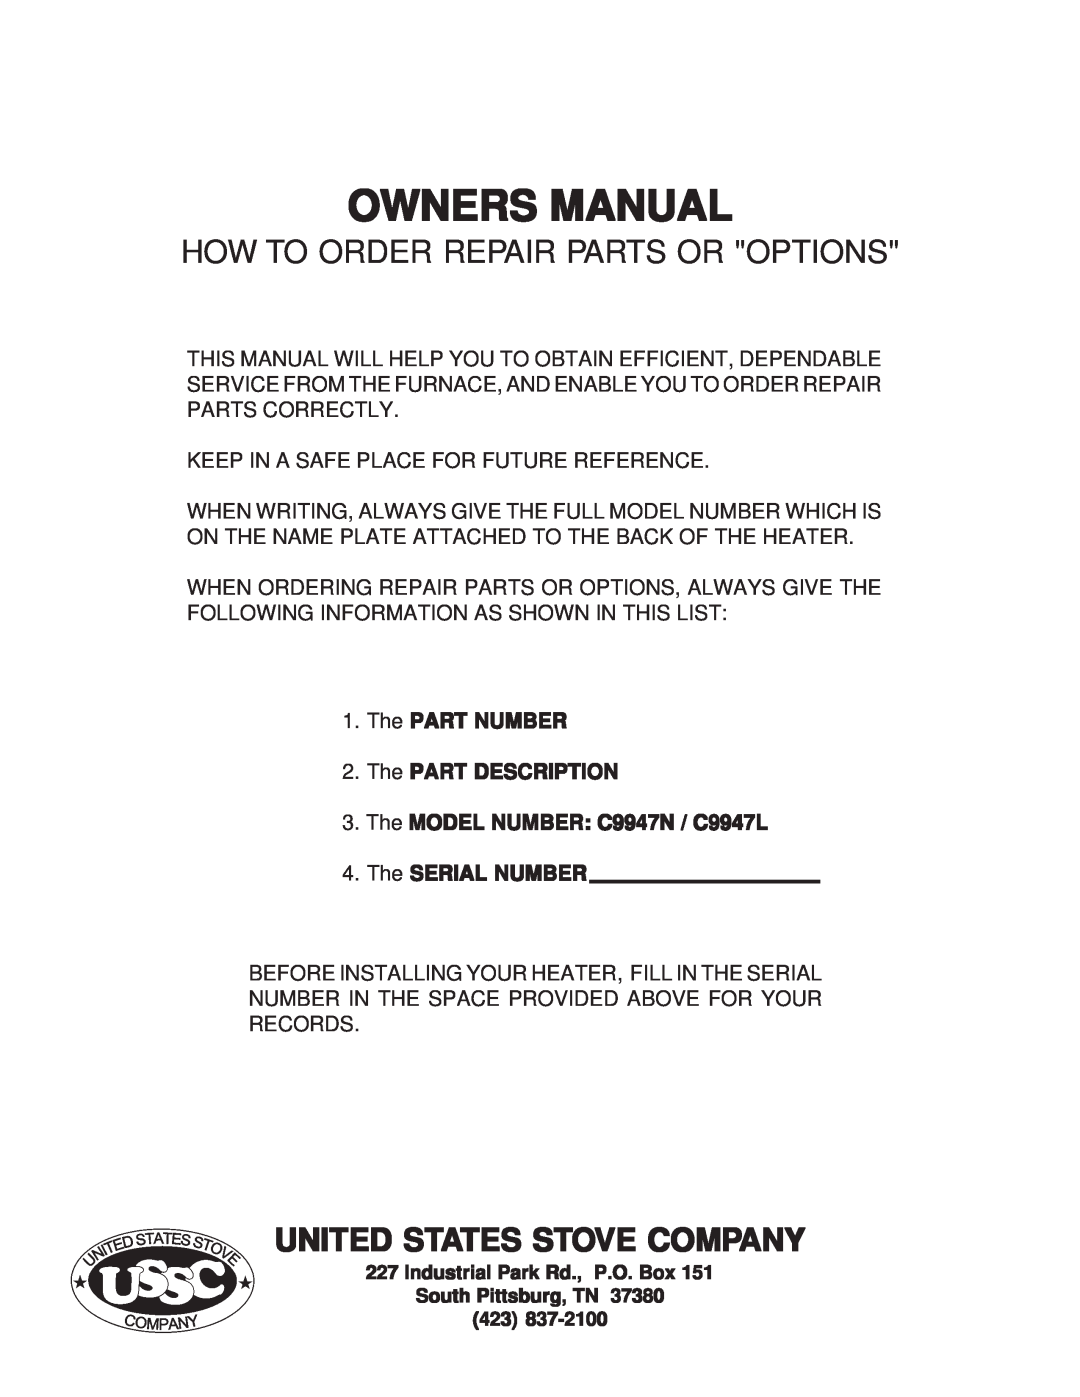 United States Stove 9947 United States Stove Company, How To Order Repair Parts Or Options, The SERIAL NUMBER 